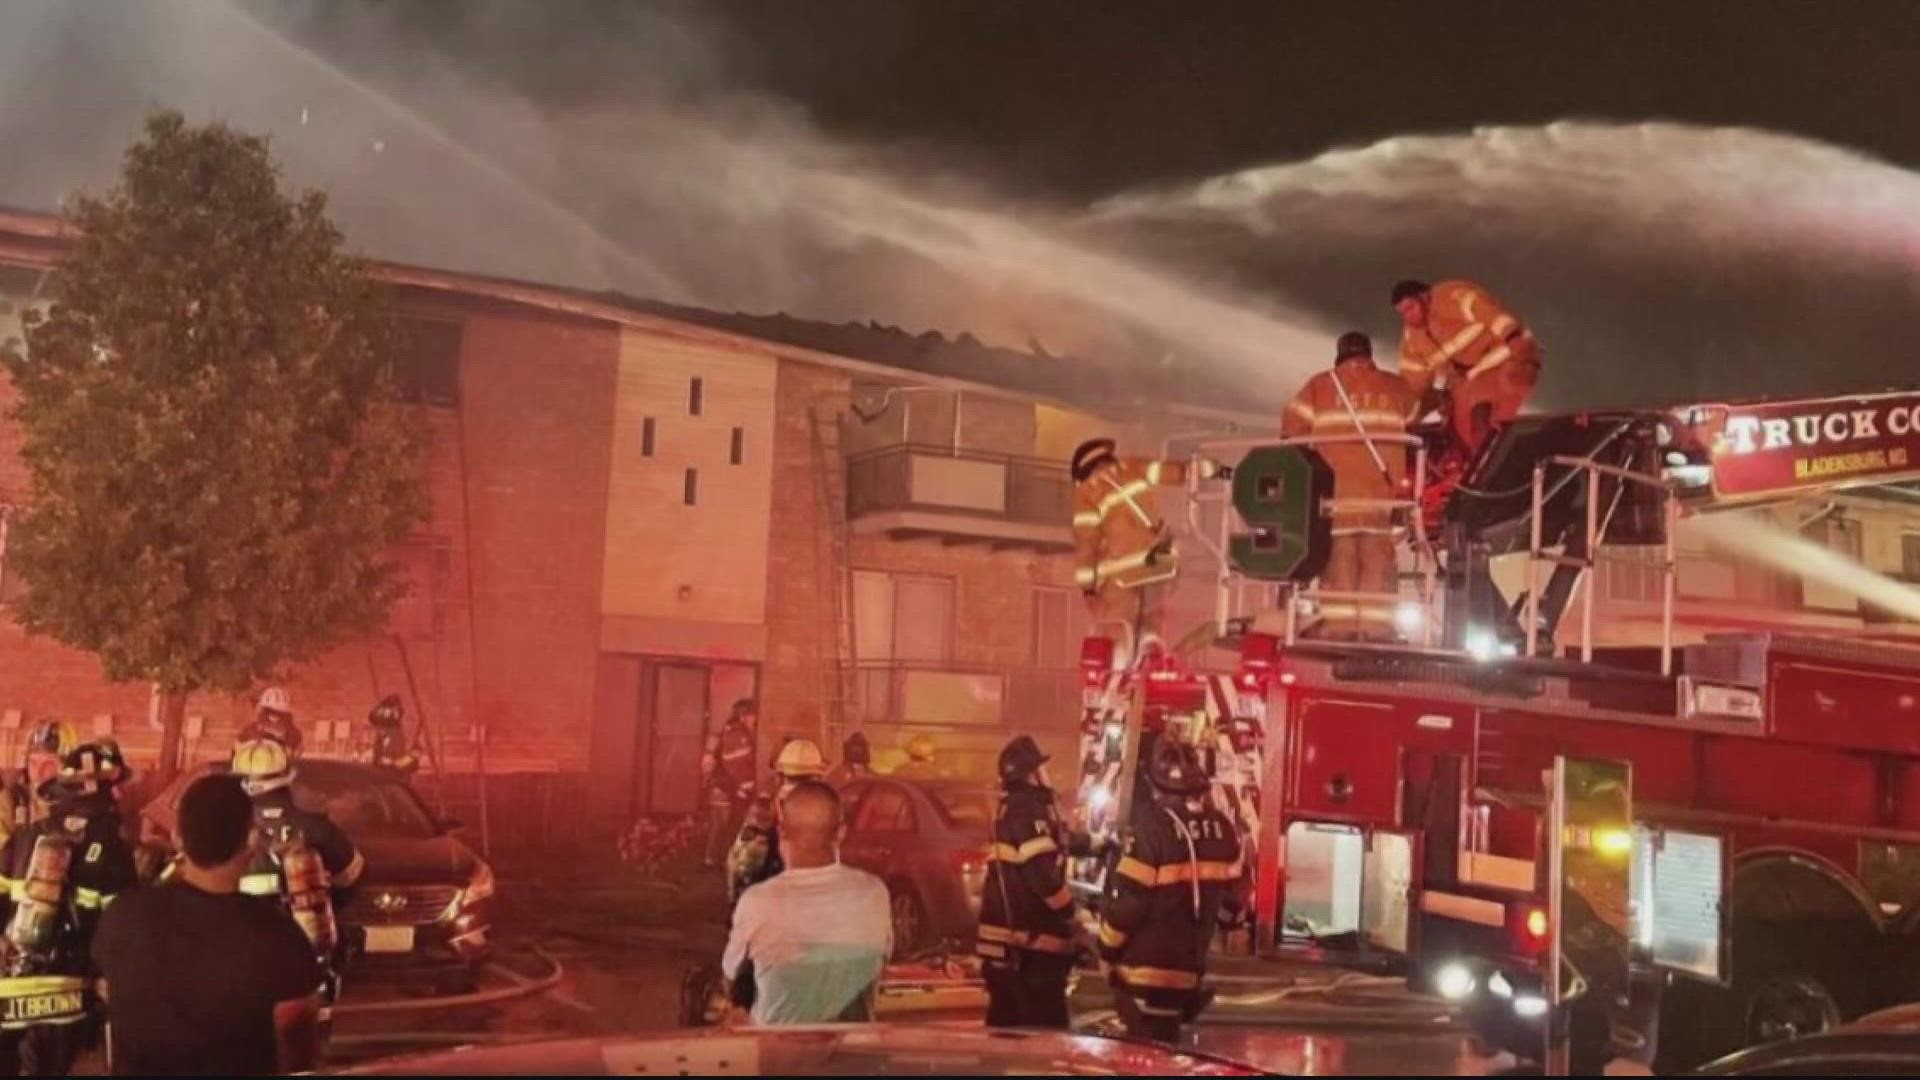 The firefighters at one point had to evacuate the building due to the scale of the flames.